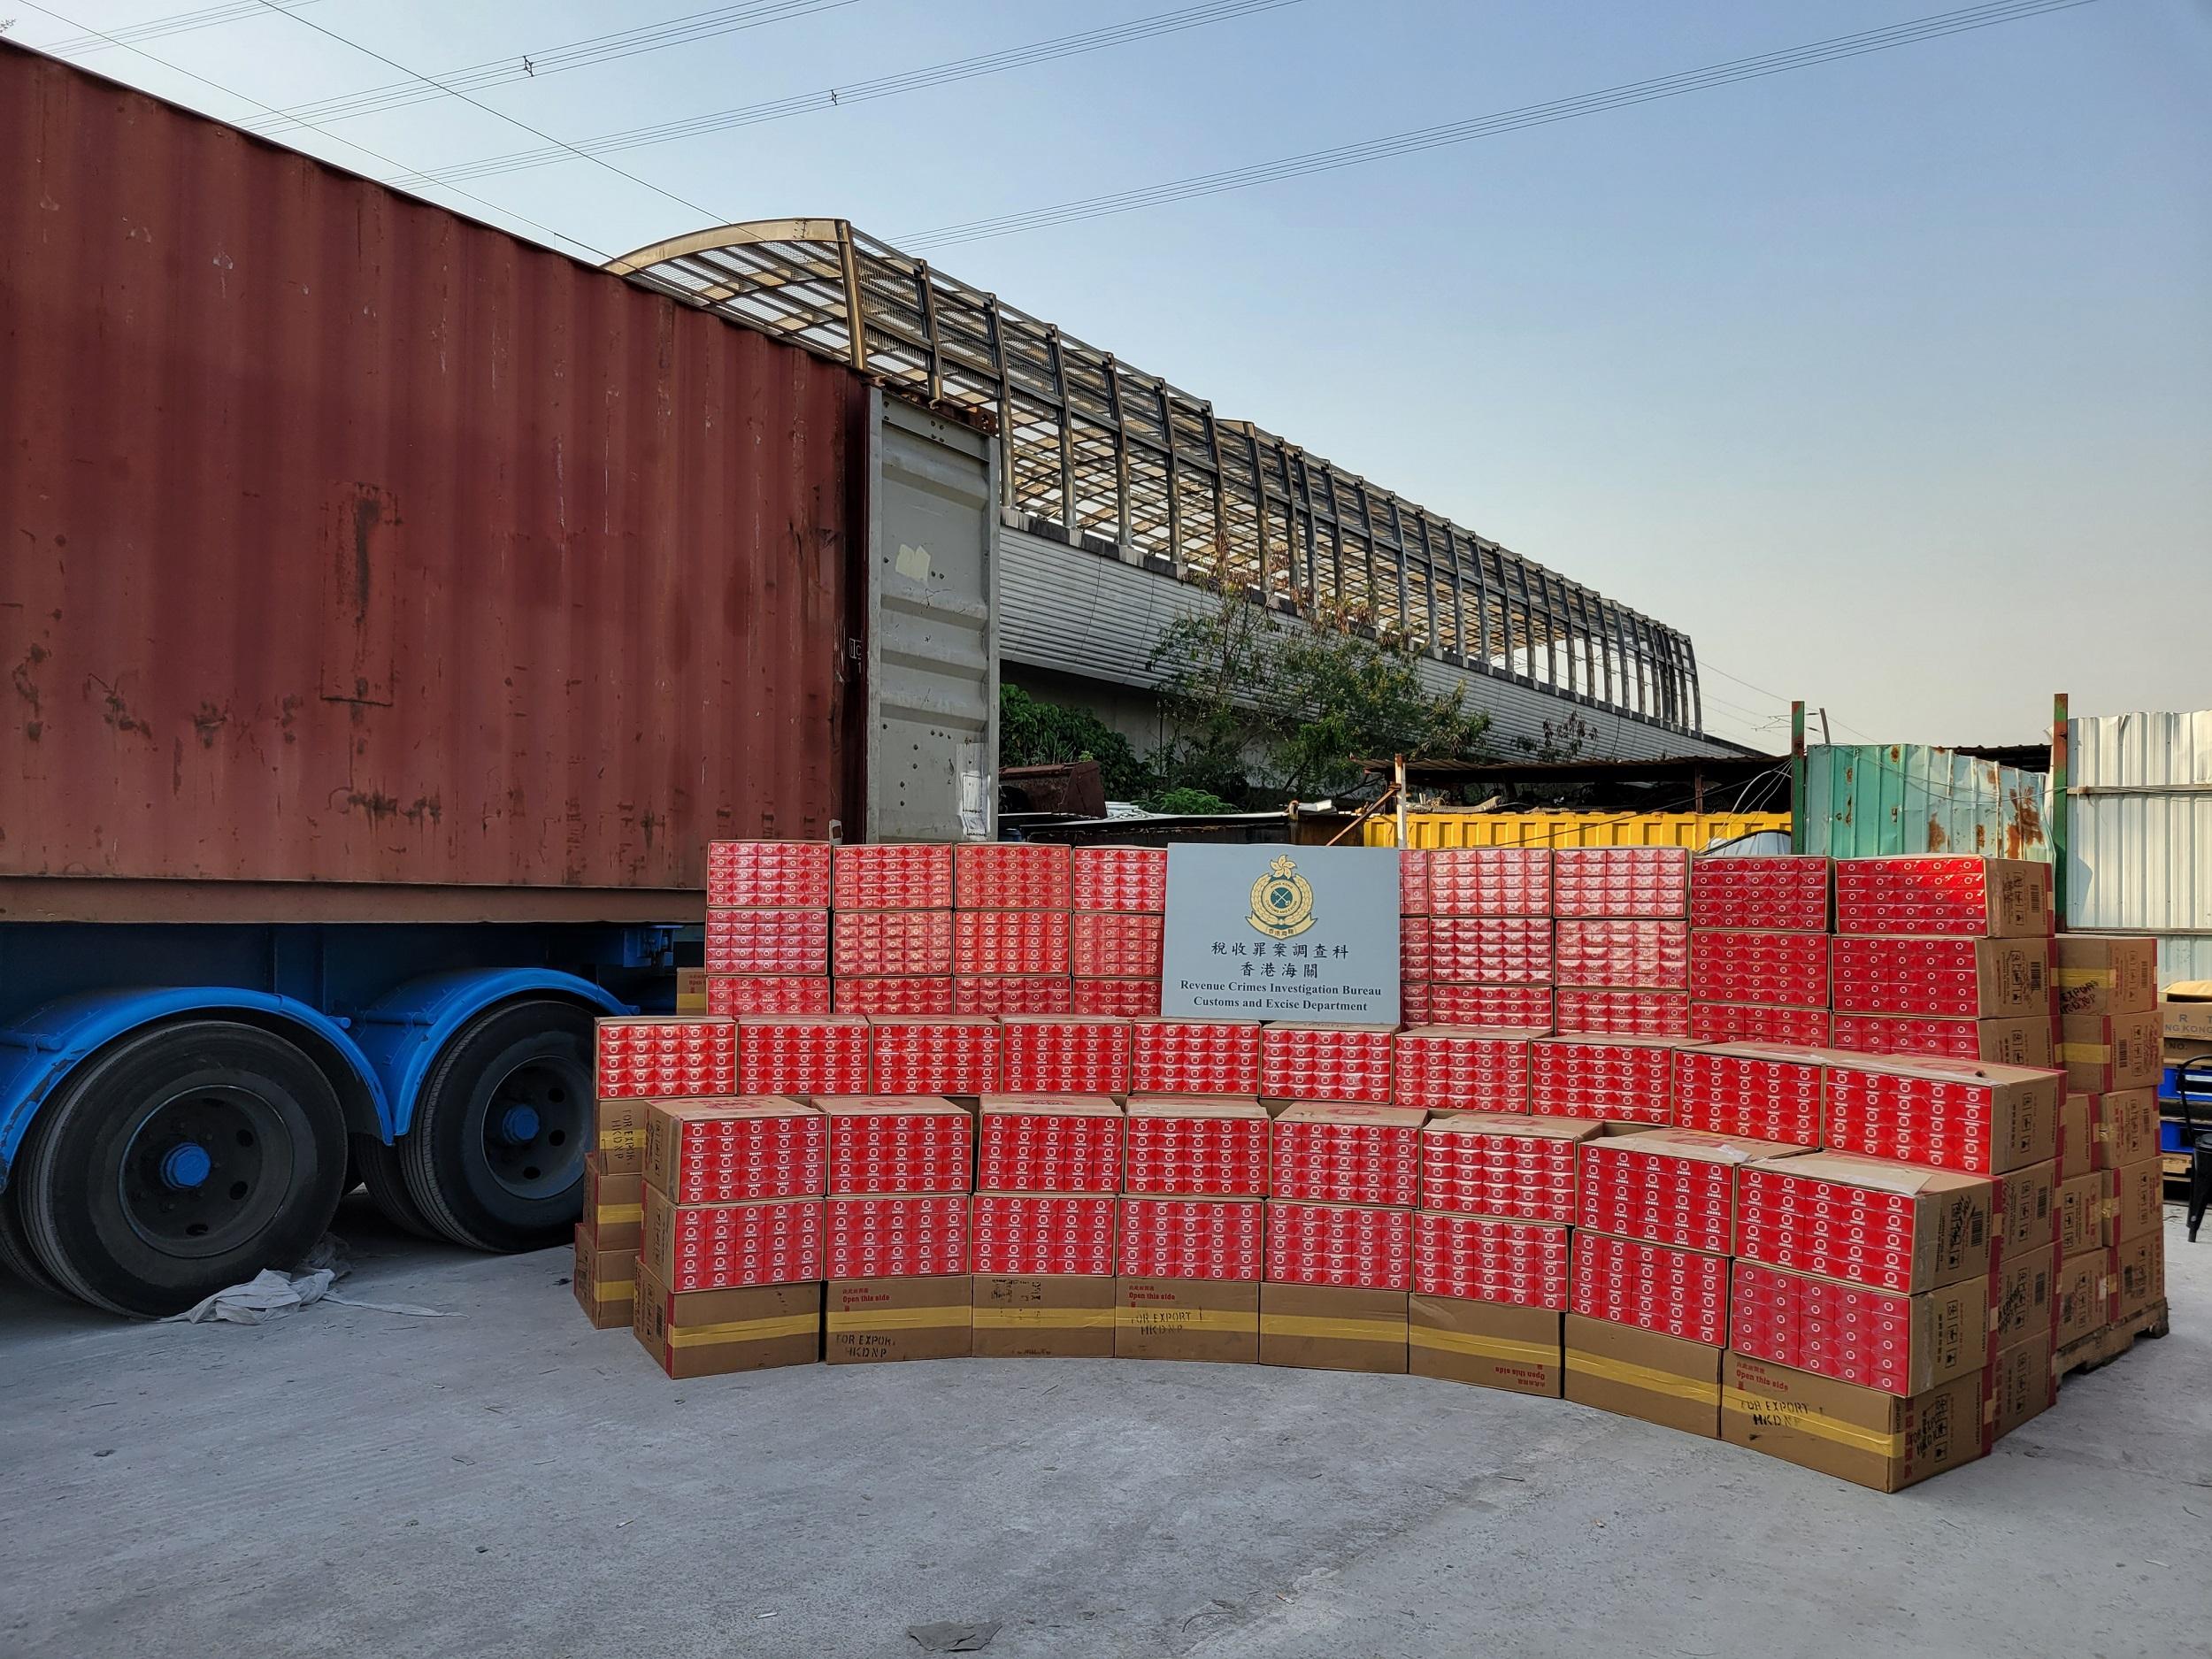 Hong Kong Customs seized about 10.5 million suspected illicit cigarettes with an estimated market value of about $29 million and a duty potential of about $20 million during an anti-illicit cigarette operation in Tuen Mun today (April 8). Two men were arrested. Photo shows the suspected illicit cigarettes seized.